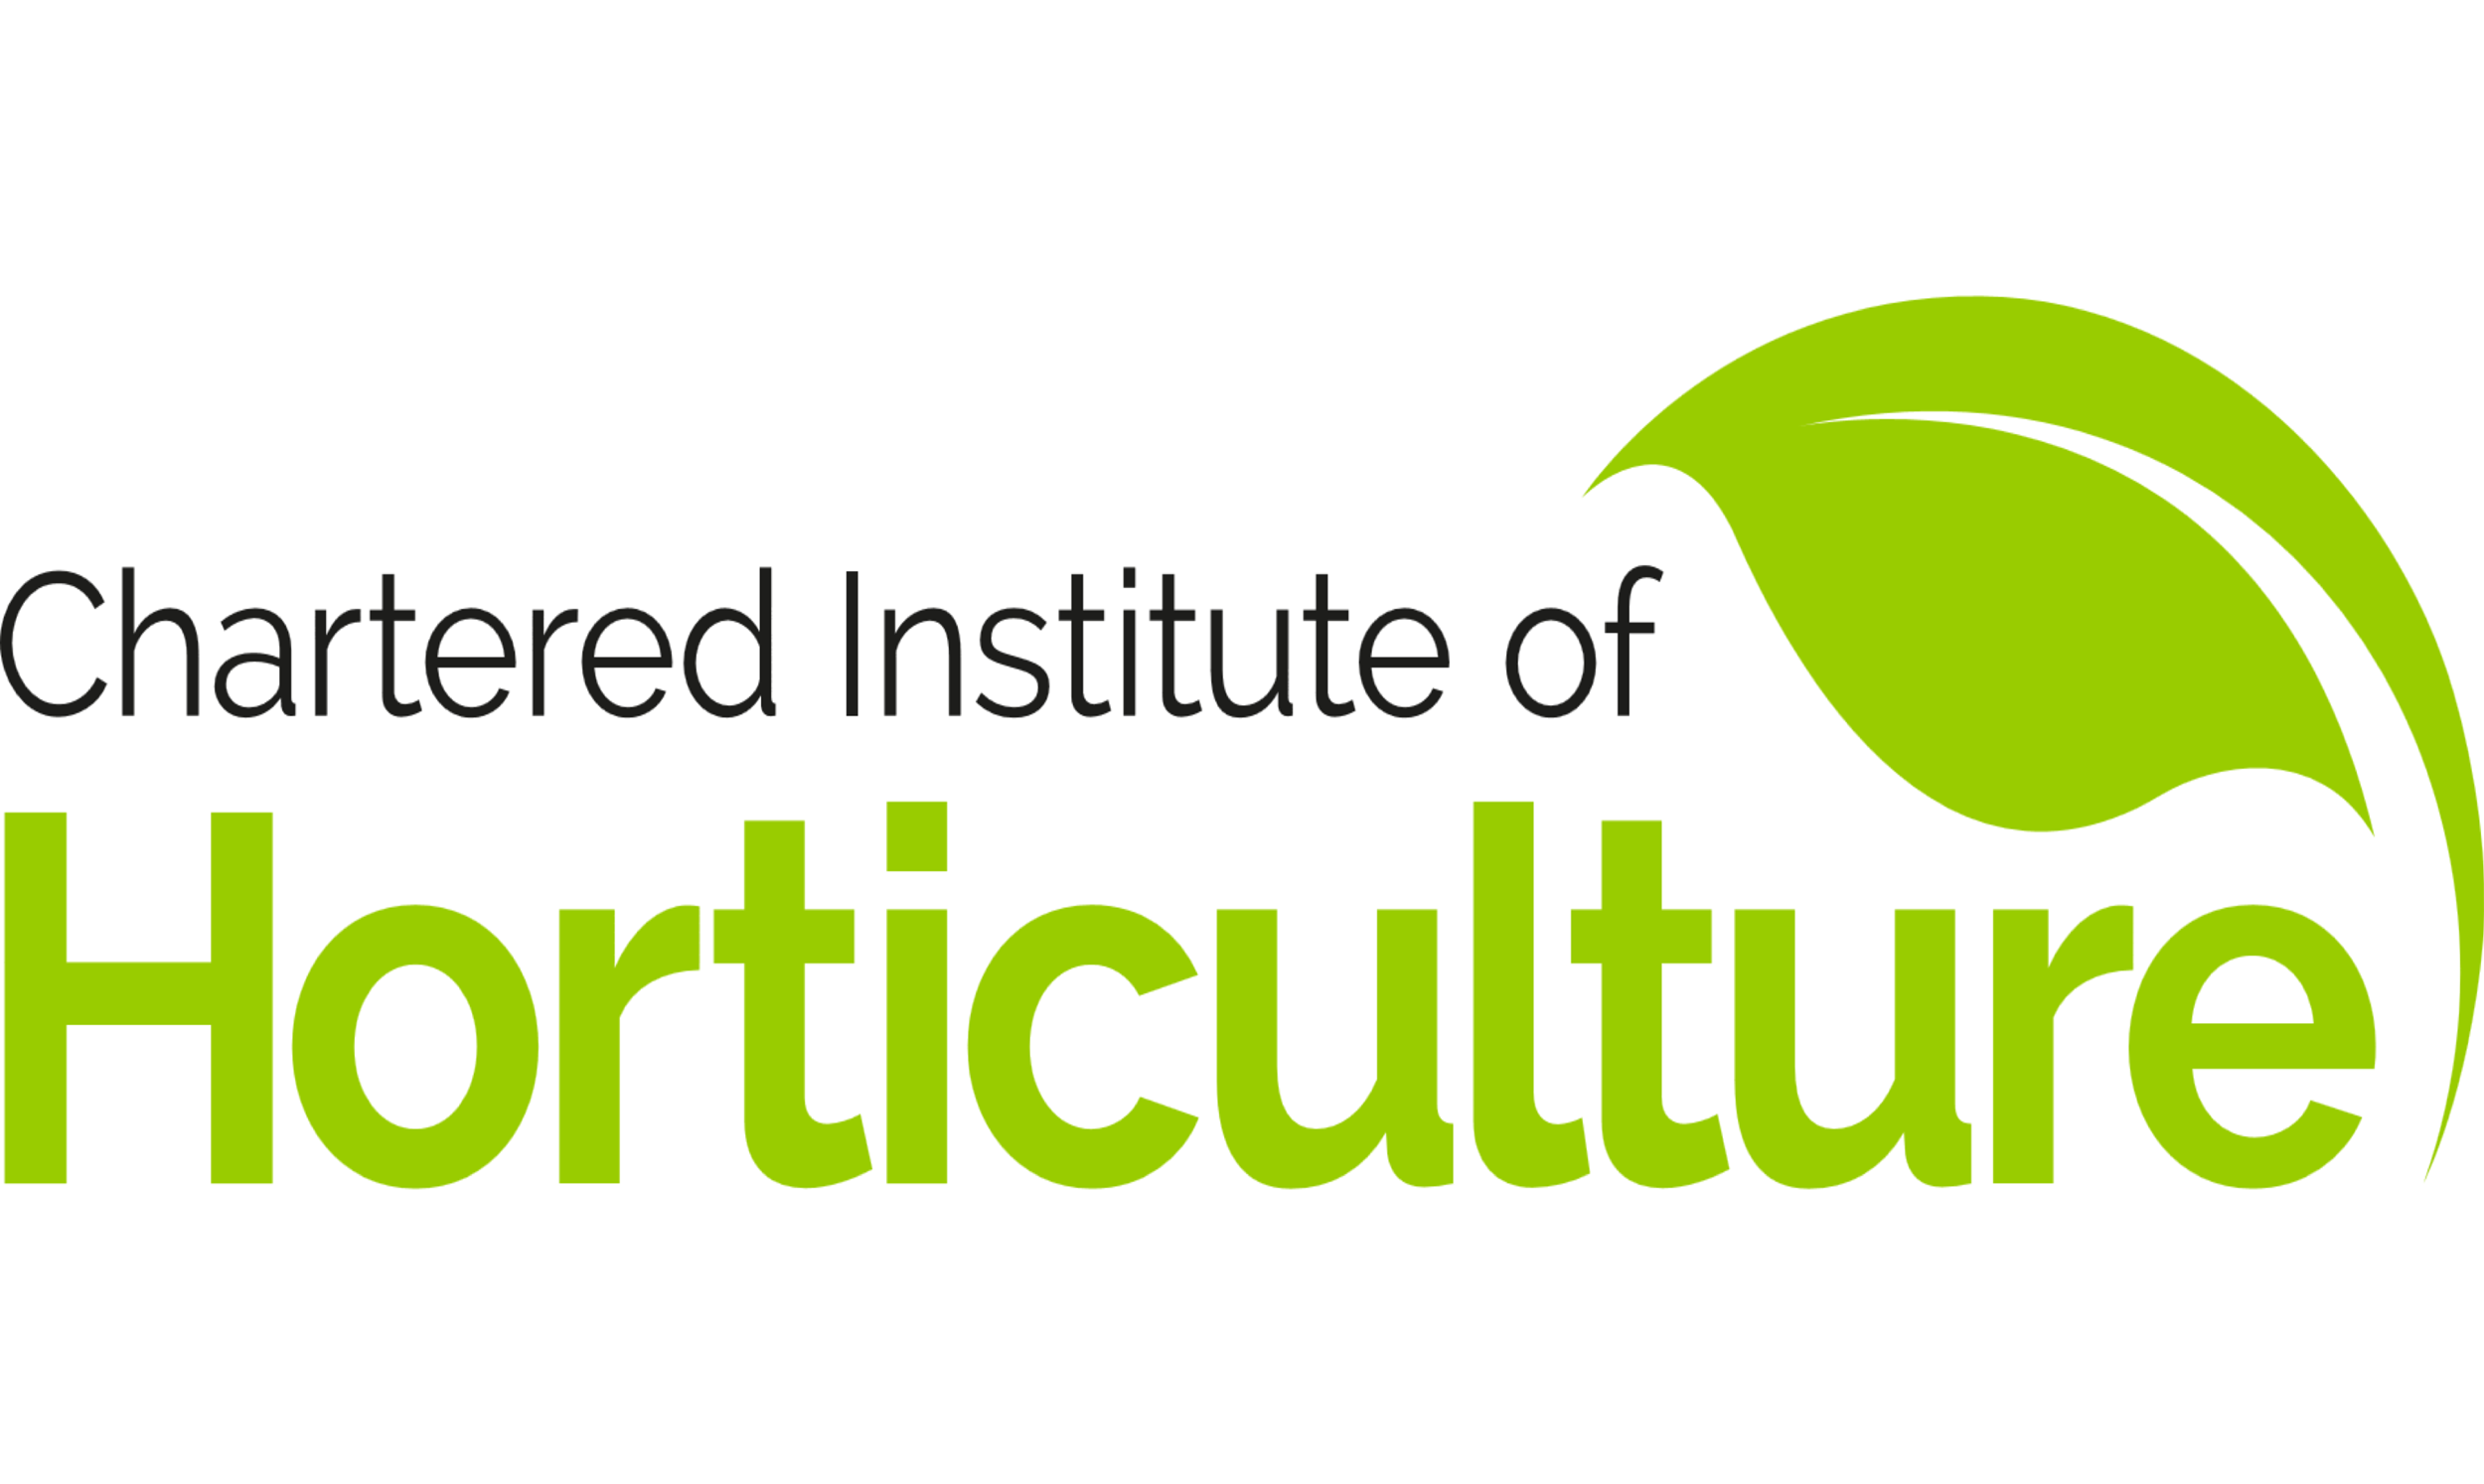 Chartered Institute of Horticulture